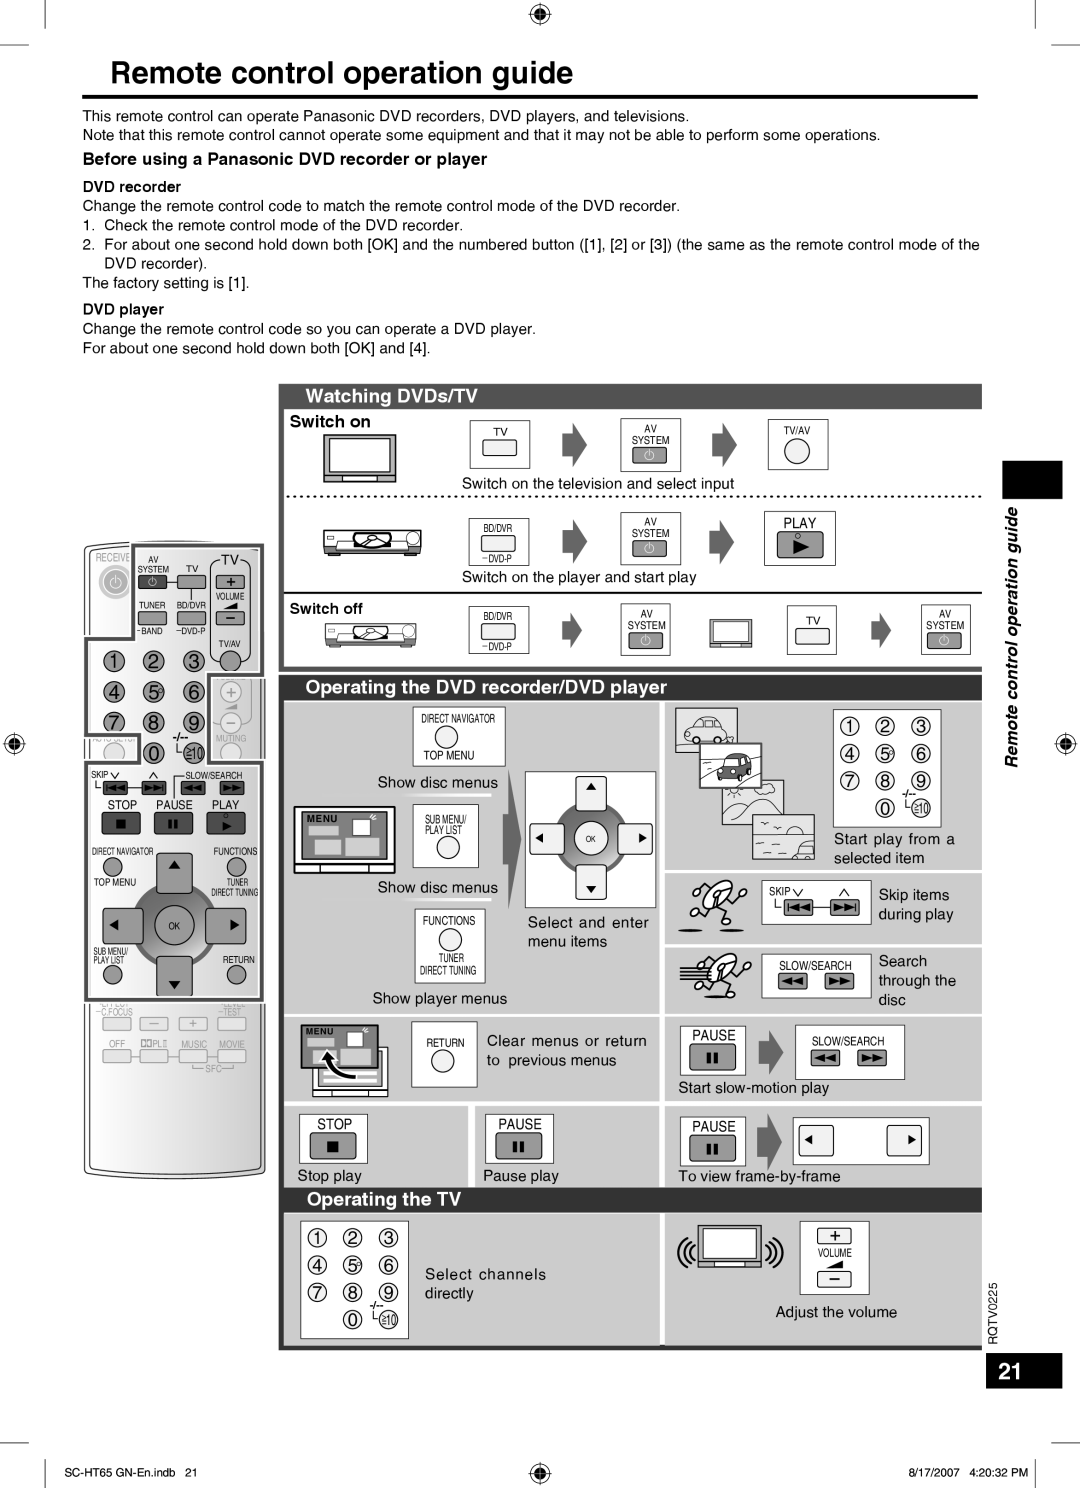 Panasonic SC-HT65 manual Remote control operation guide, Watching DVDs/TV, Operating the DVD recorder/DVD player 